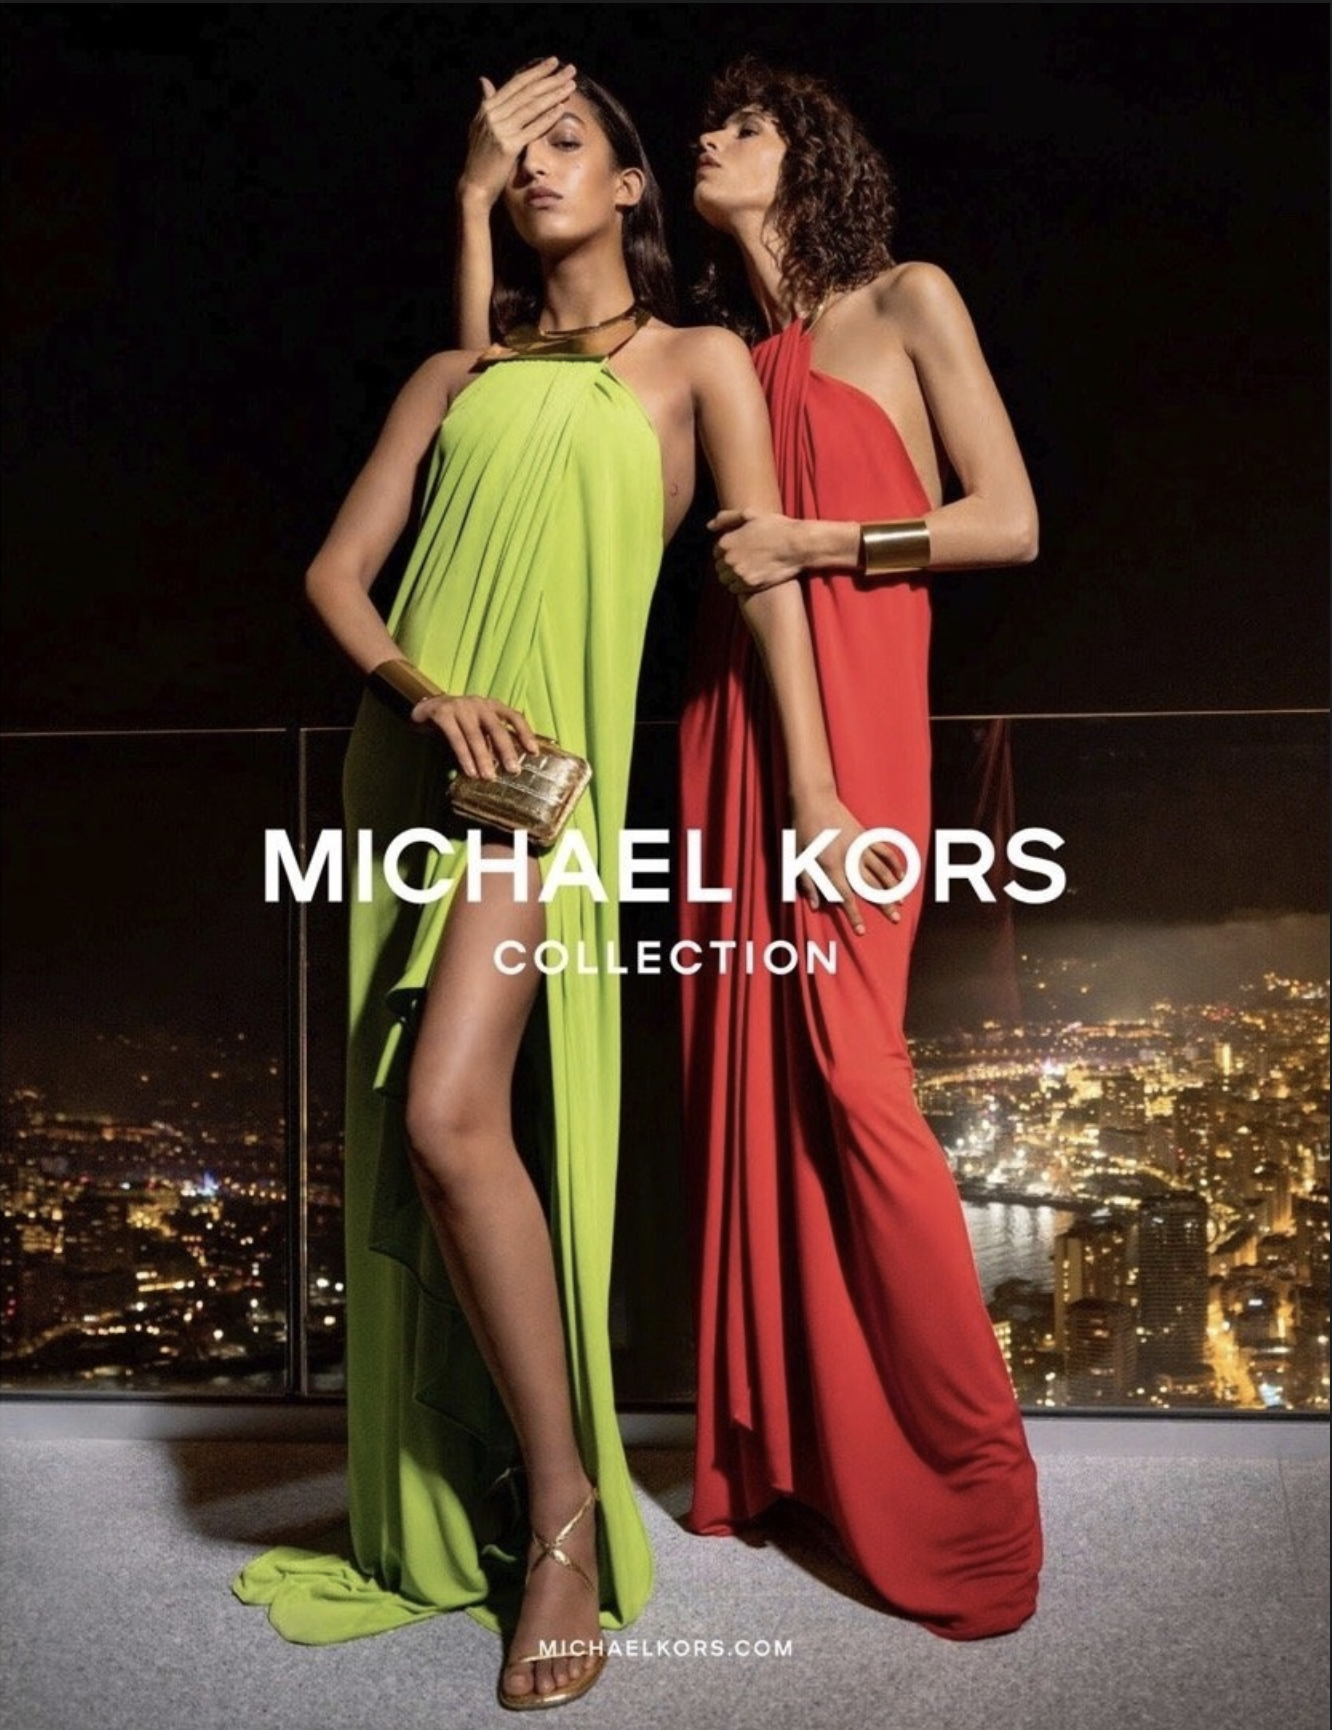 Michael Kors Doubles Down on the Return of New York  The New York Times